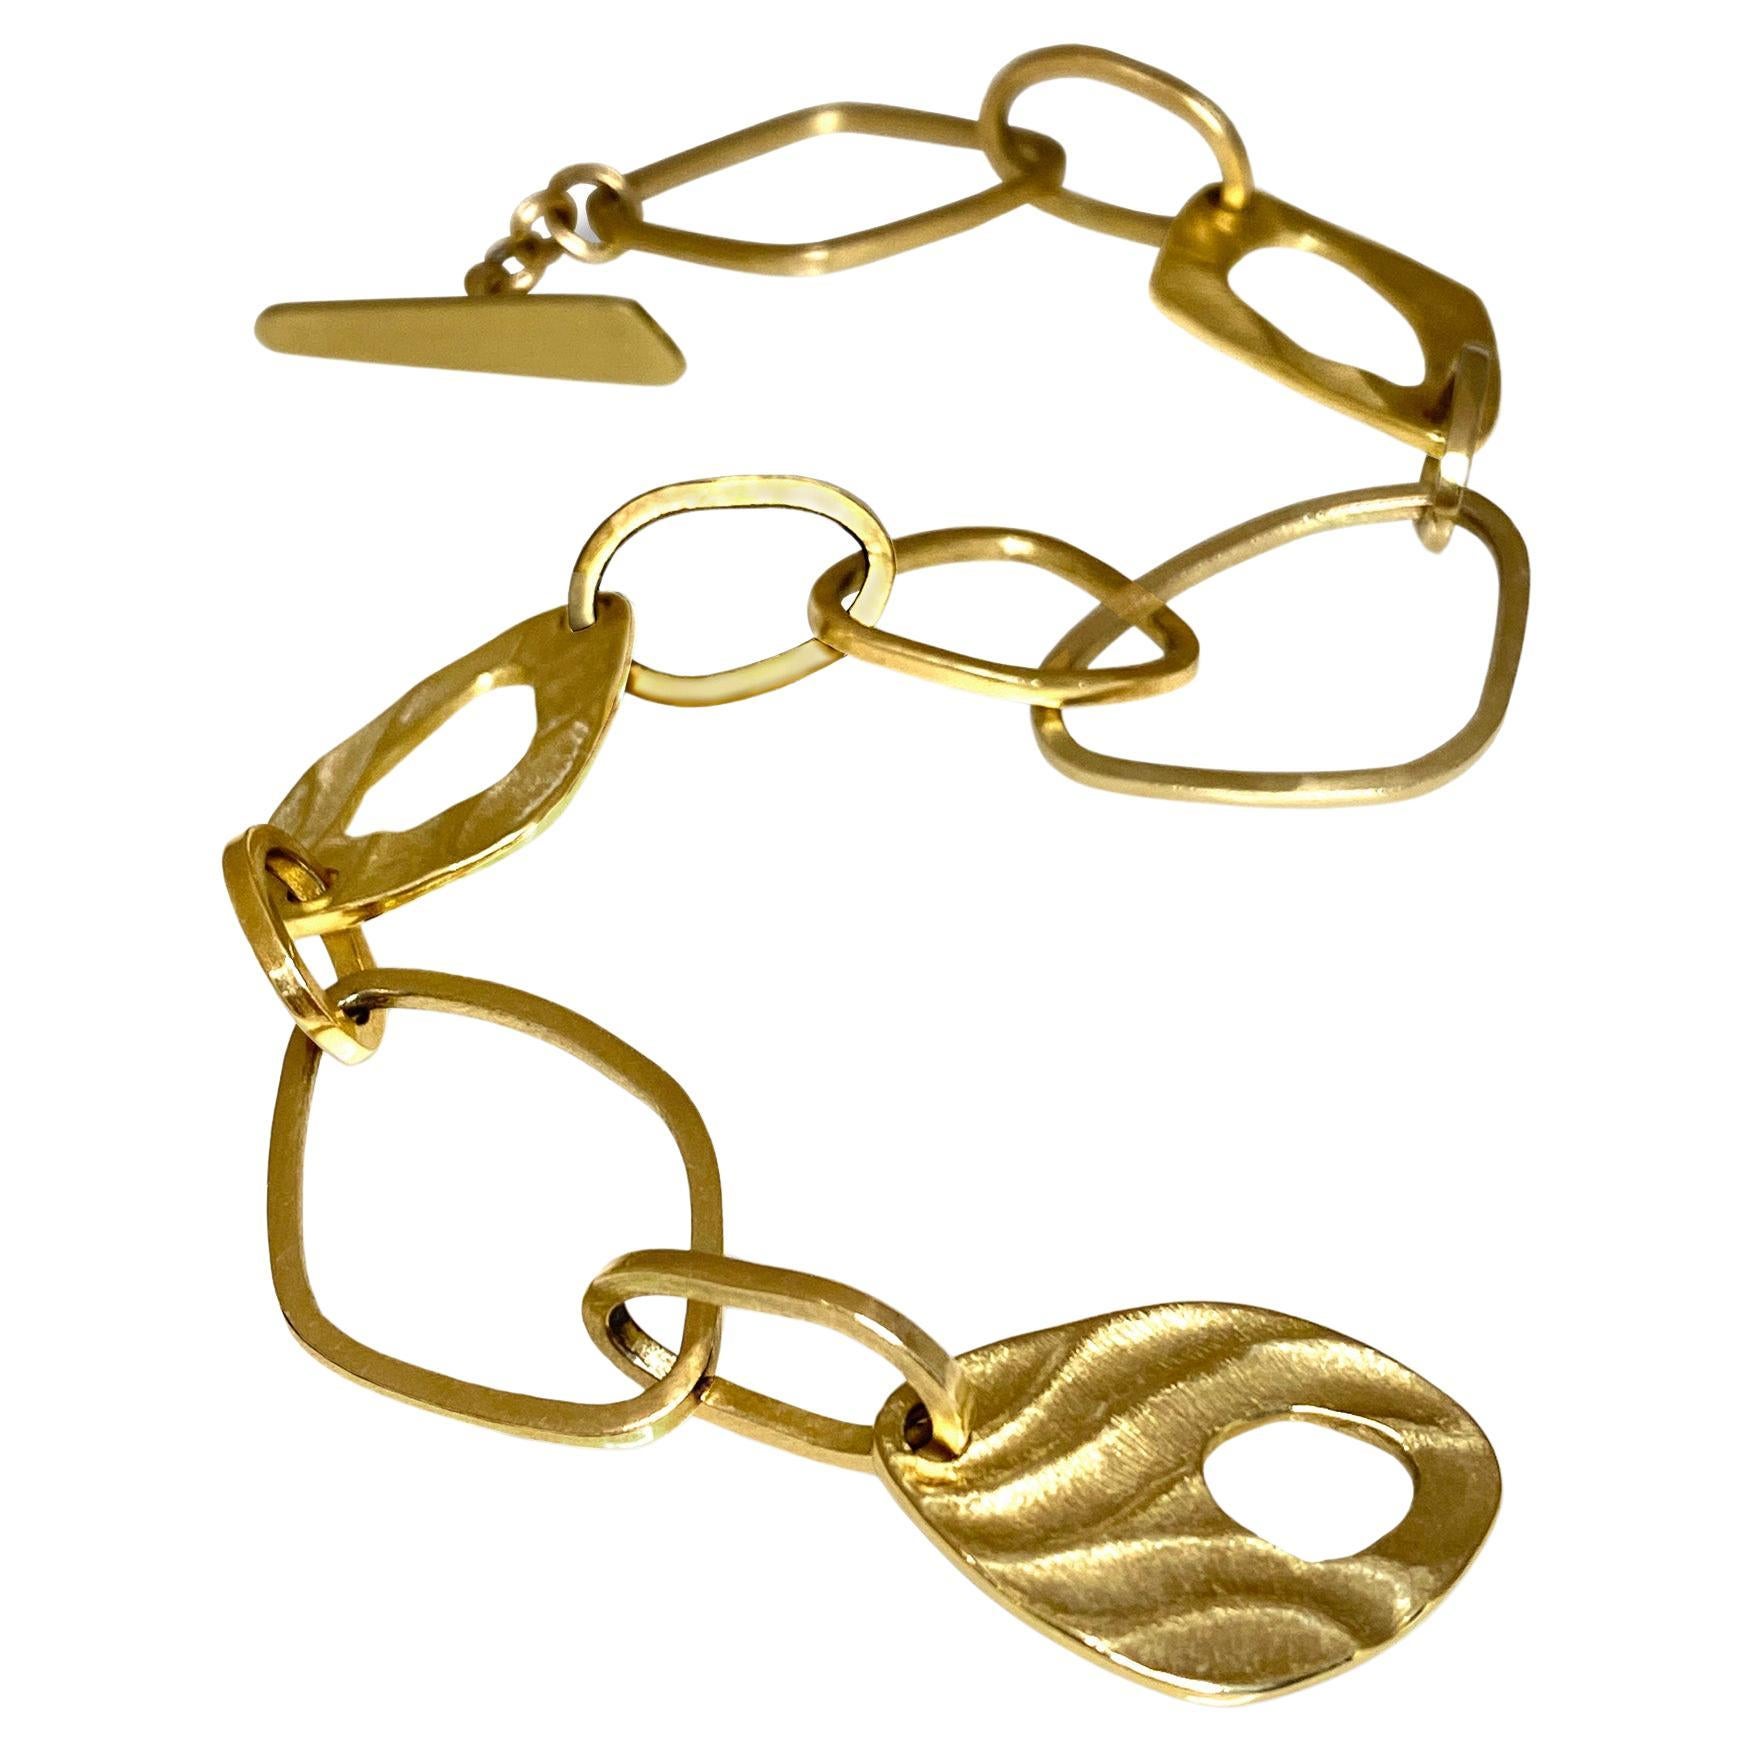  18 Karat Yellow Gold Open Pebble Link Bracelet with Toggle Closure by K.MITA  For Sale